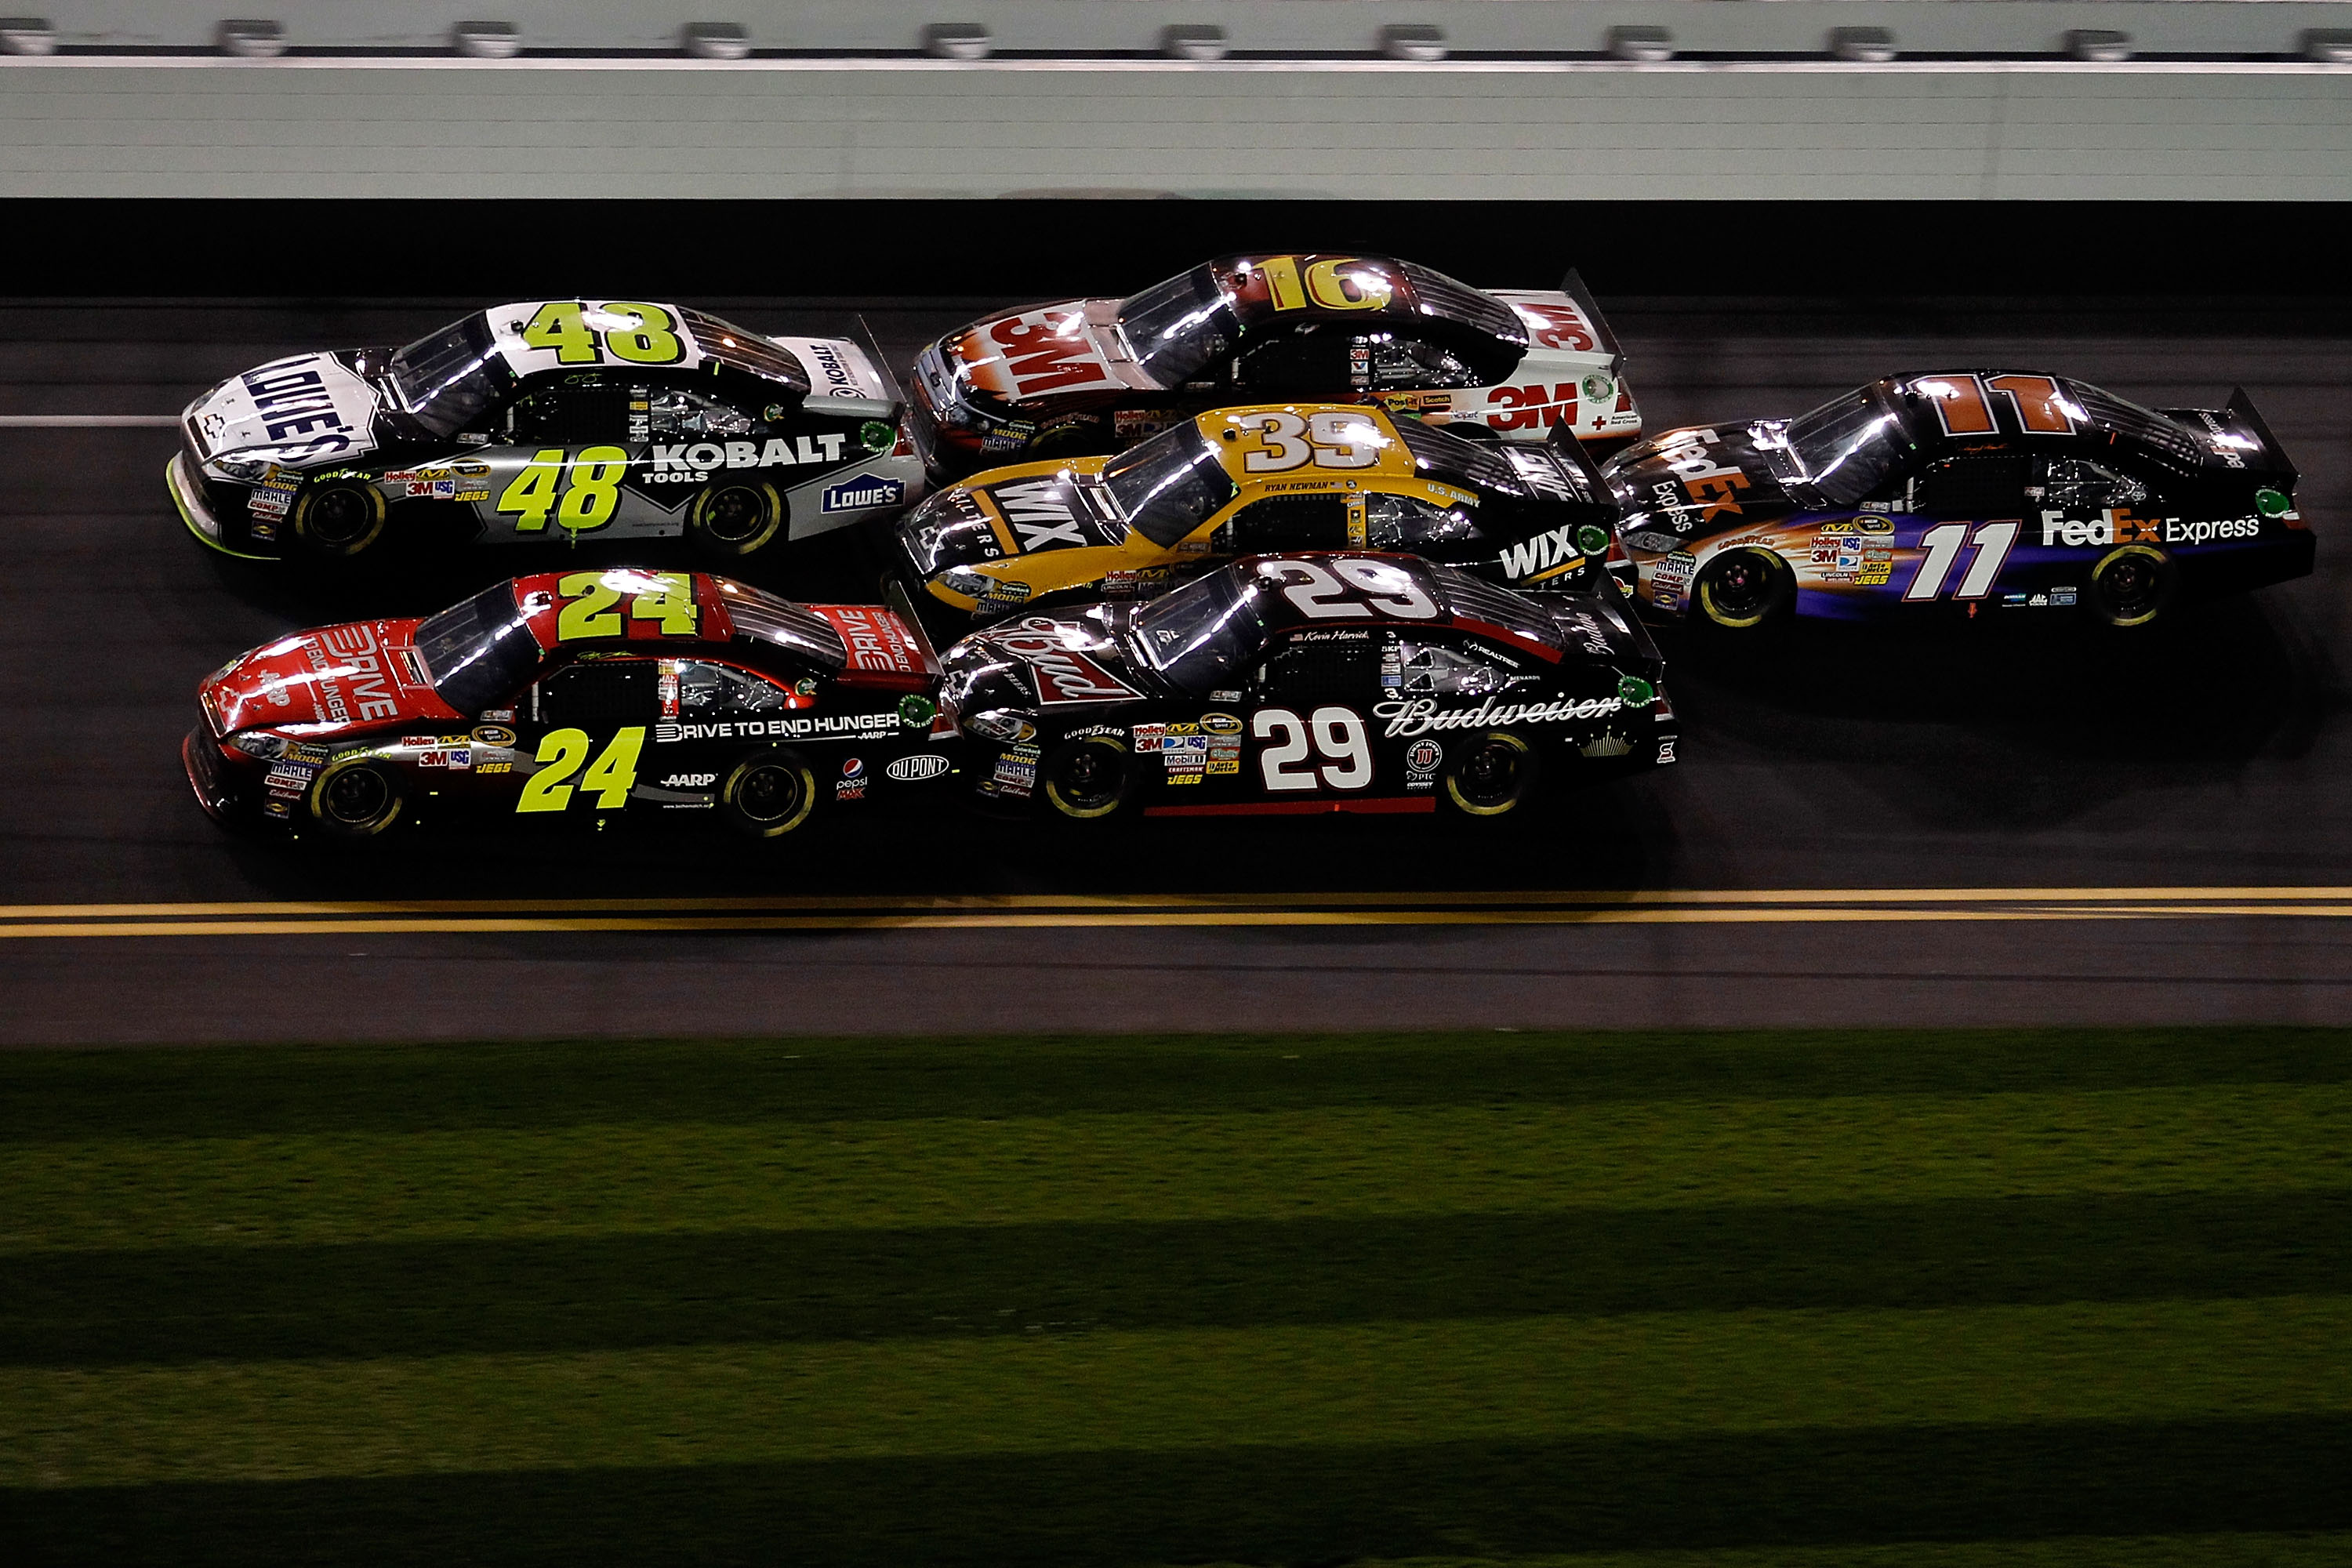 DAYTONA BEACH, FL - FEBRUARY 12:  Jeff Gordon, driver of the #24 Drive to End Hunger Chevrolet, and Jimmie Johnson, driver of the #48 Lowe's Chevrolet, lead Kevin Harvick, driver of the #29 Budweiser Chevrolet, Ryan Newman, driver of the #39 Wix Chevrolet